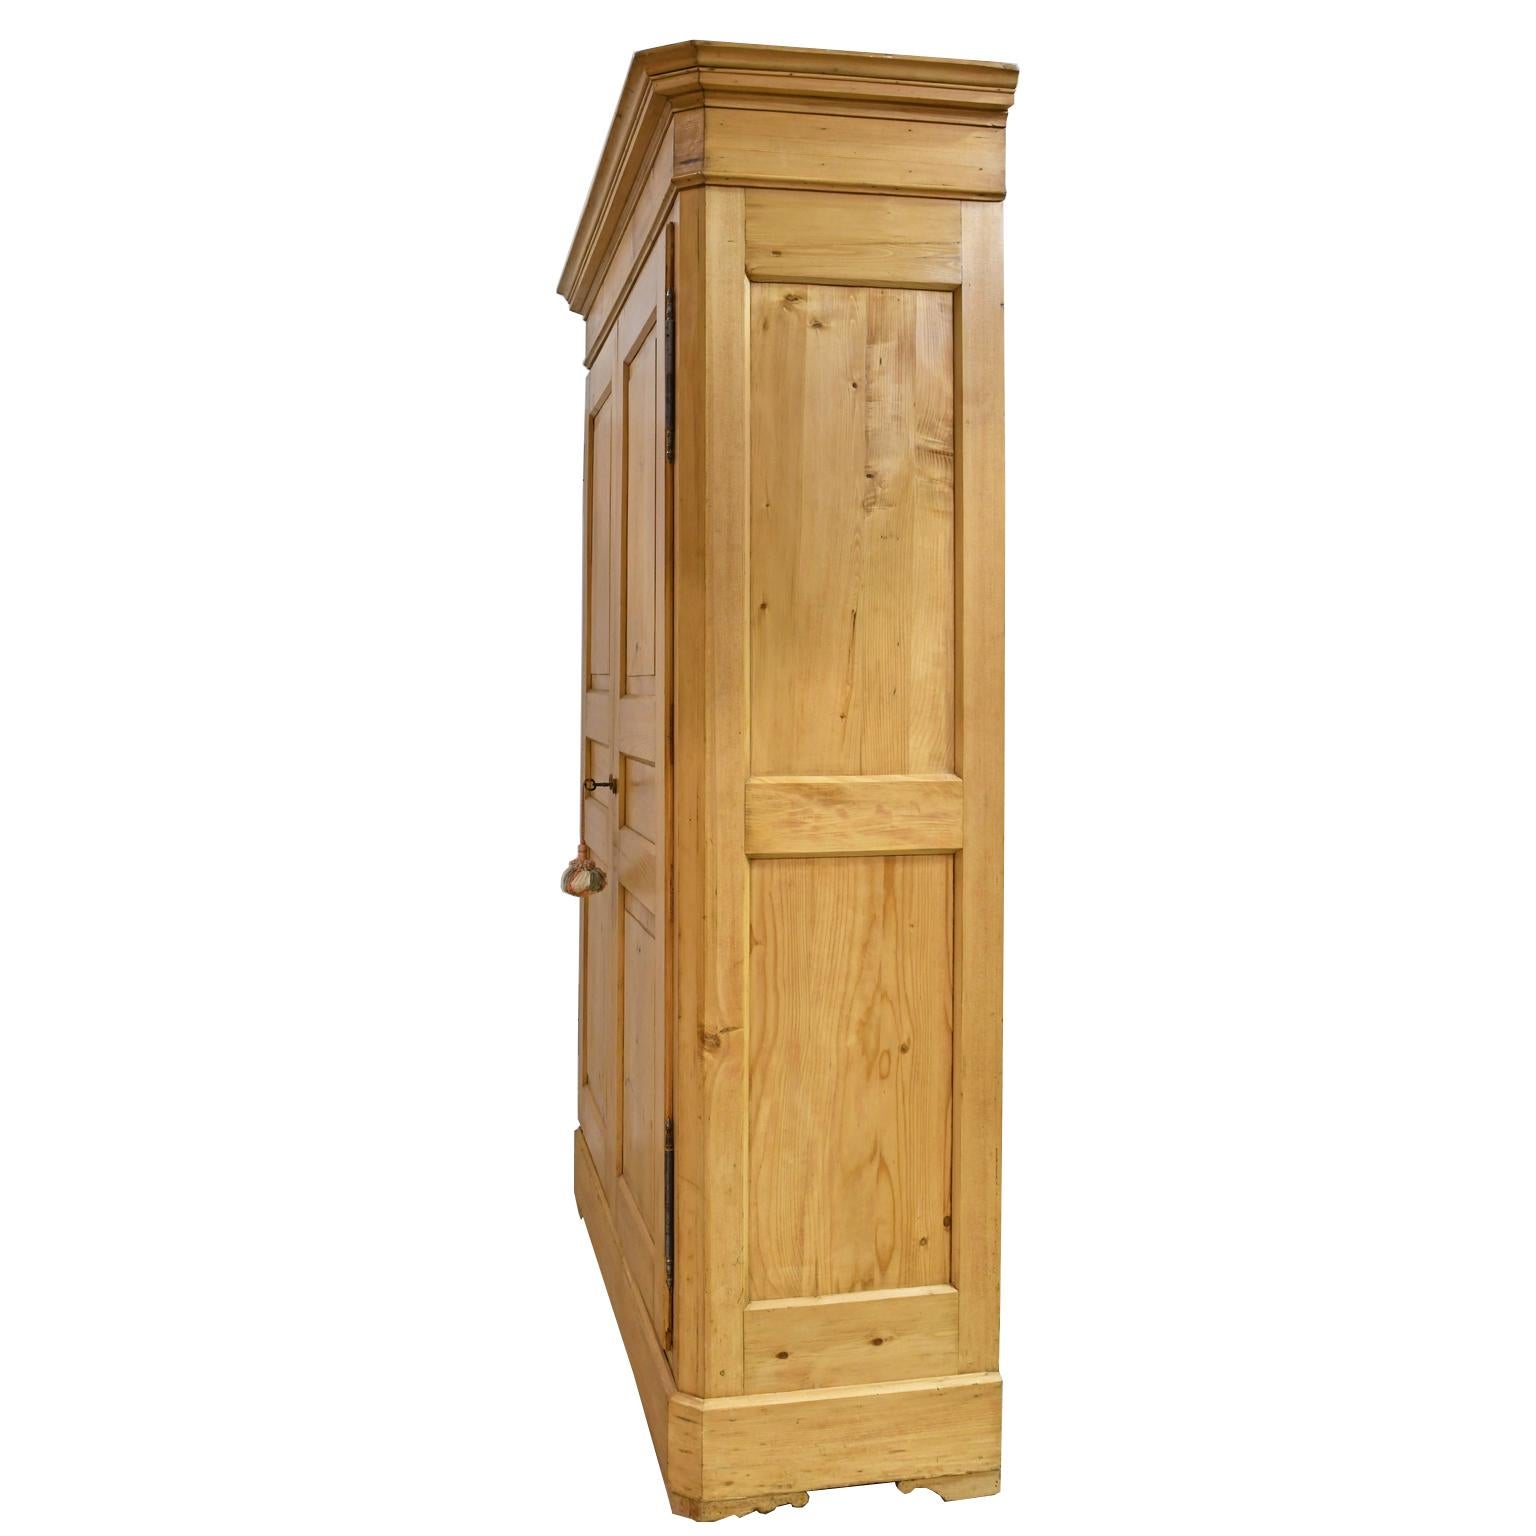 19th Century English Wardrobe in Light-Colored Pine with Paneled Doors, c. 1840